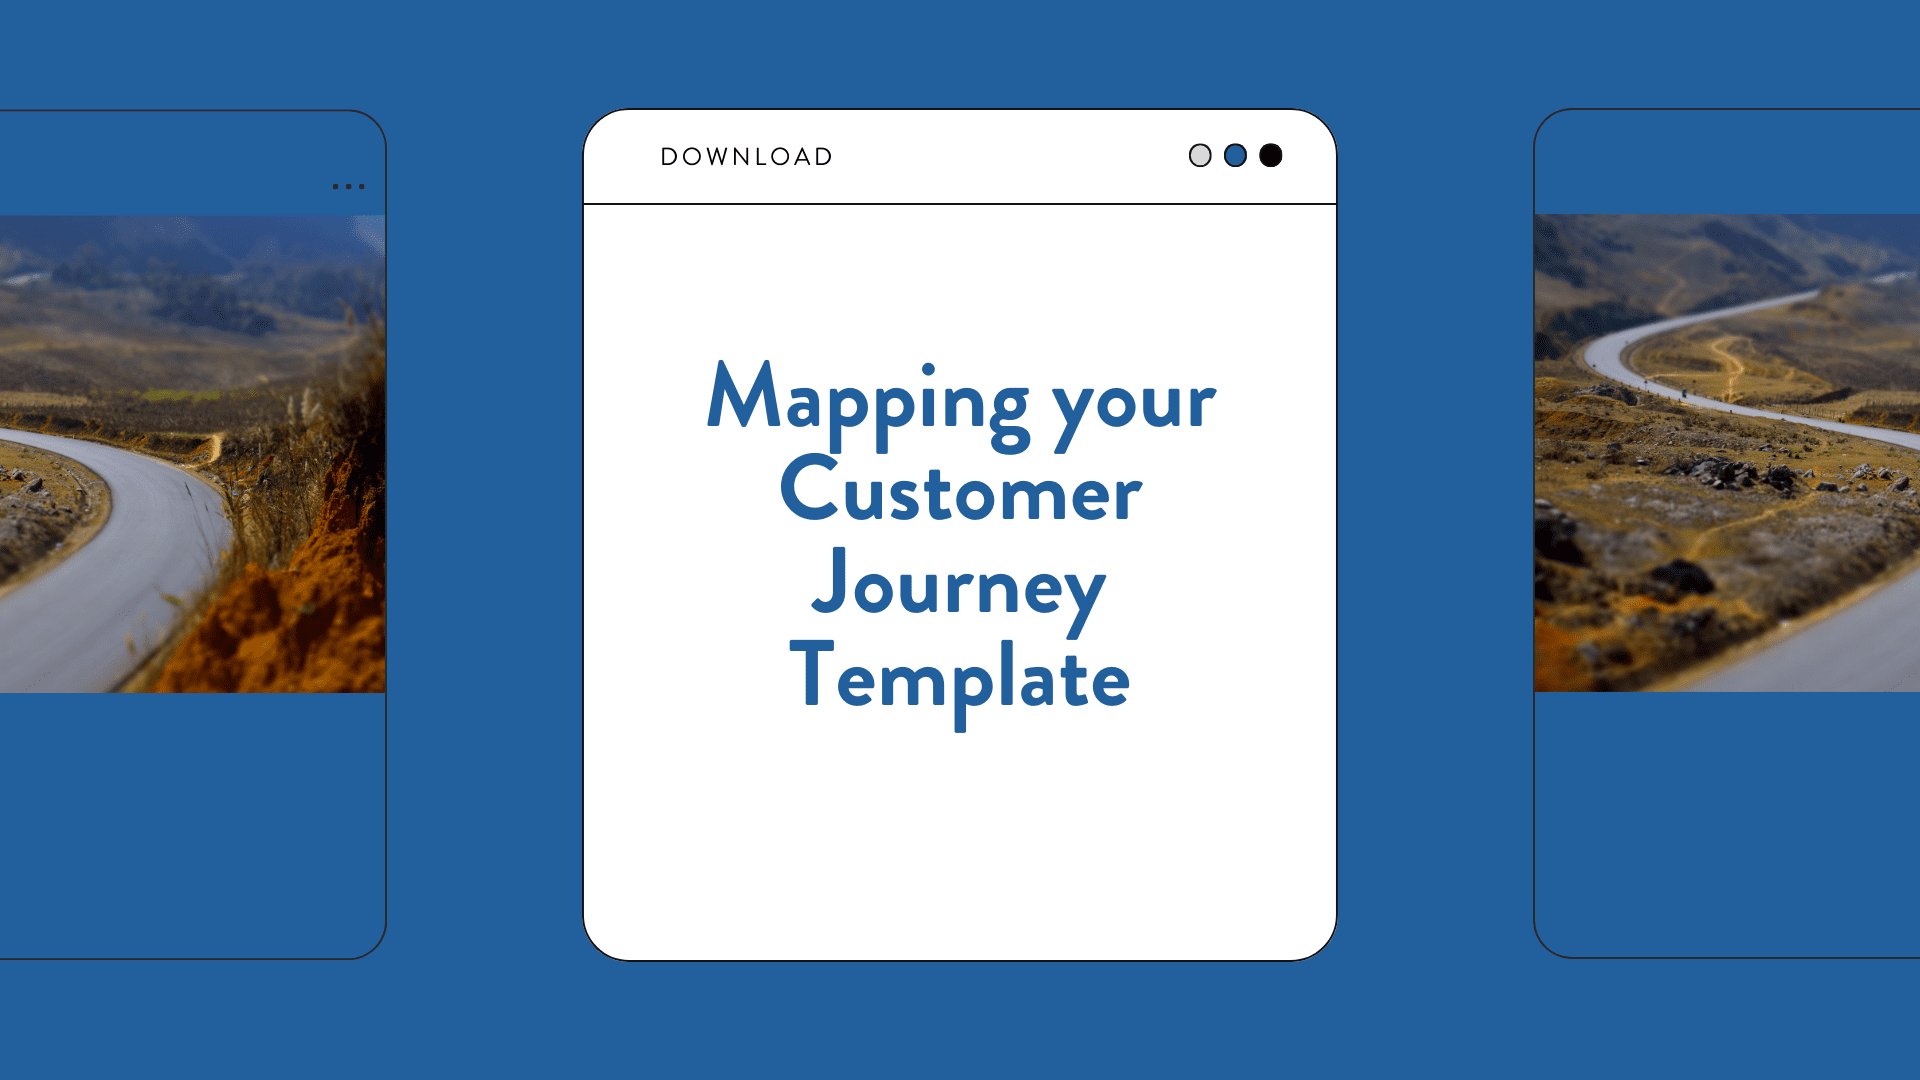 Mapping your Customer Journey Template